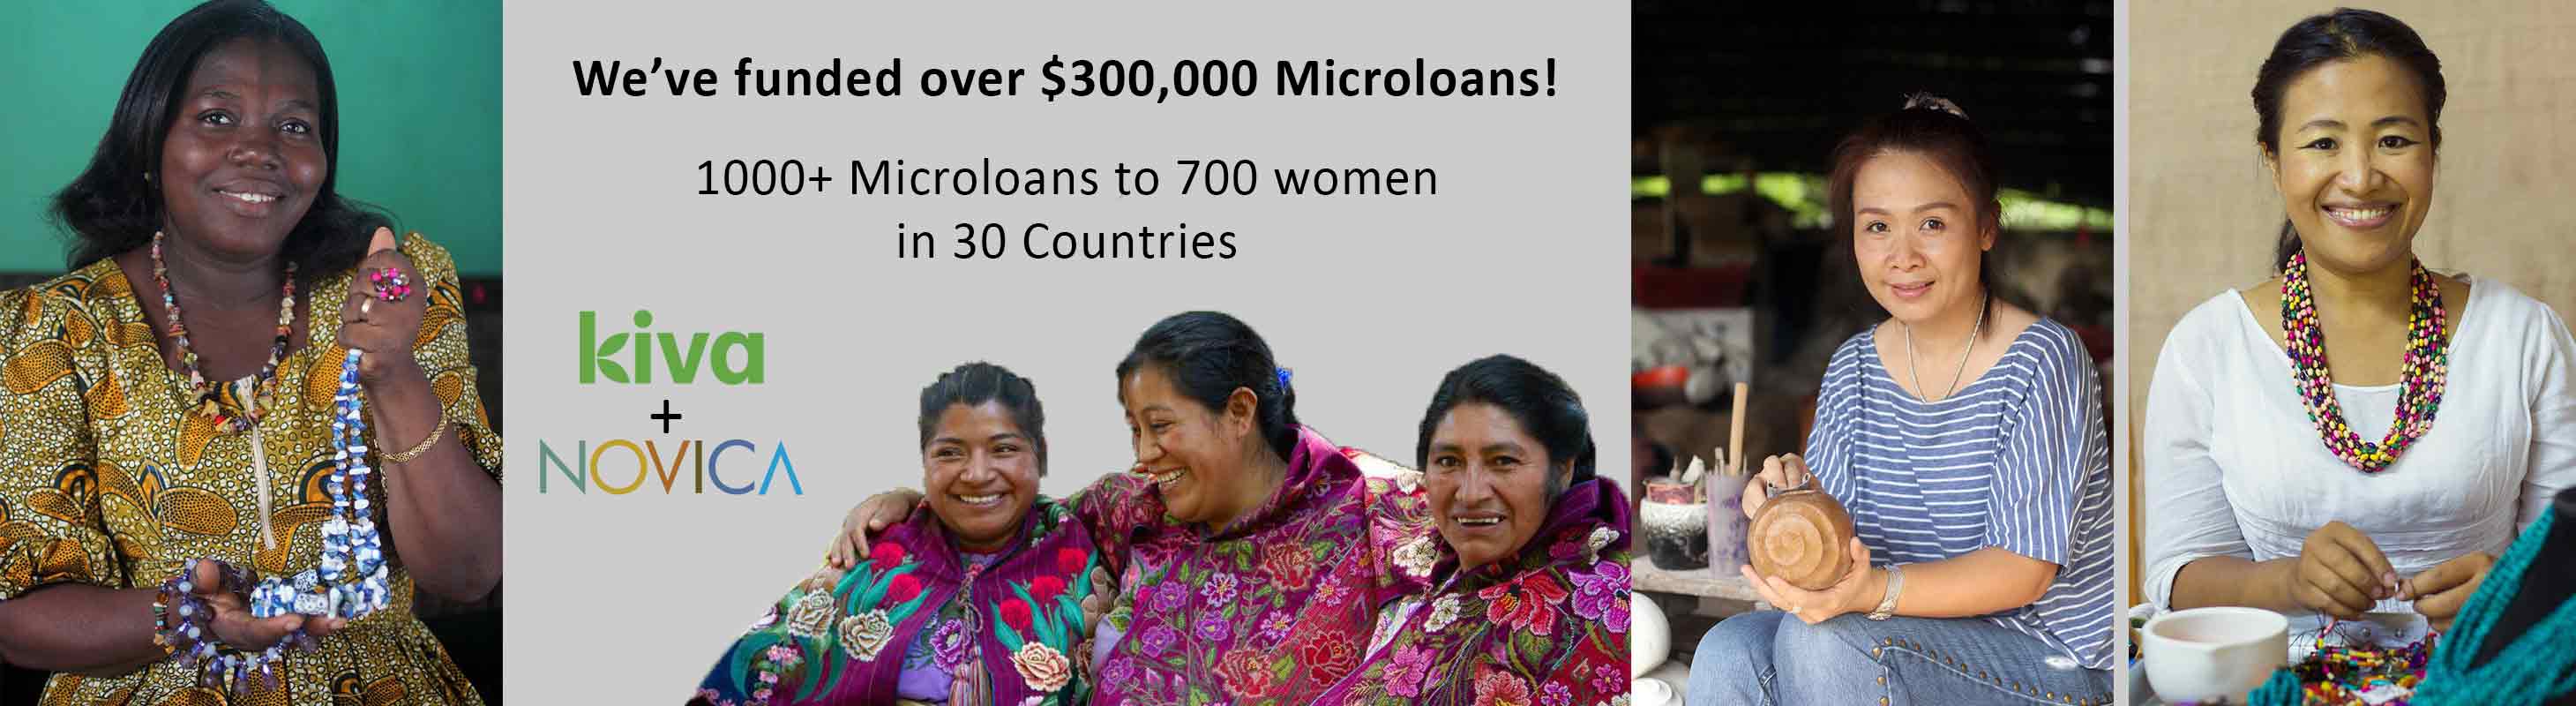 We've funded over $300,000 in microloans through Kiva and Novica